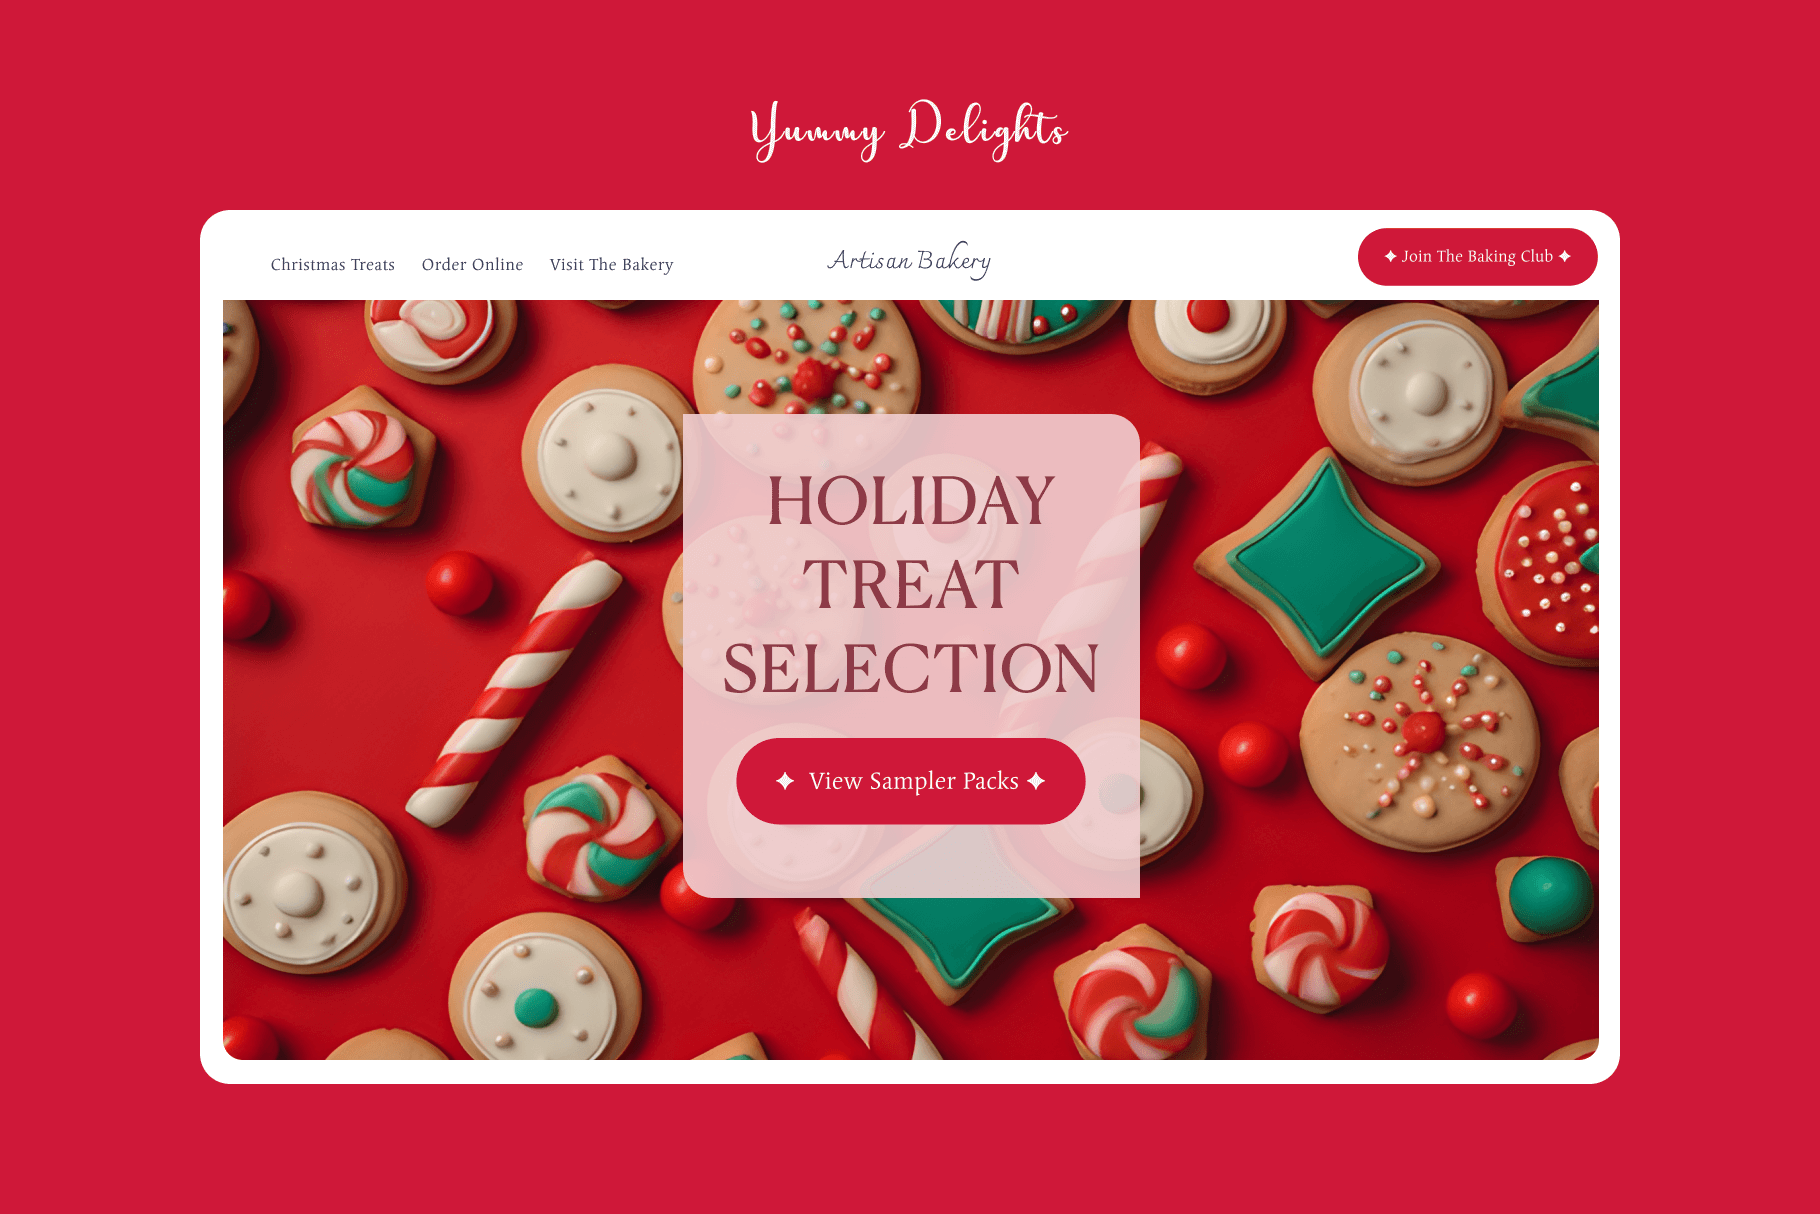 Web design of a Christmas cookie bakery